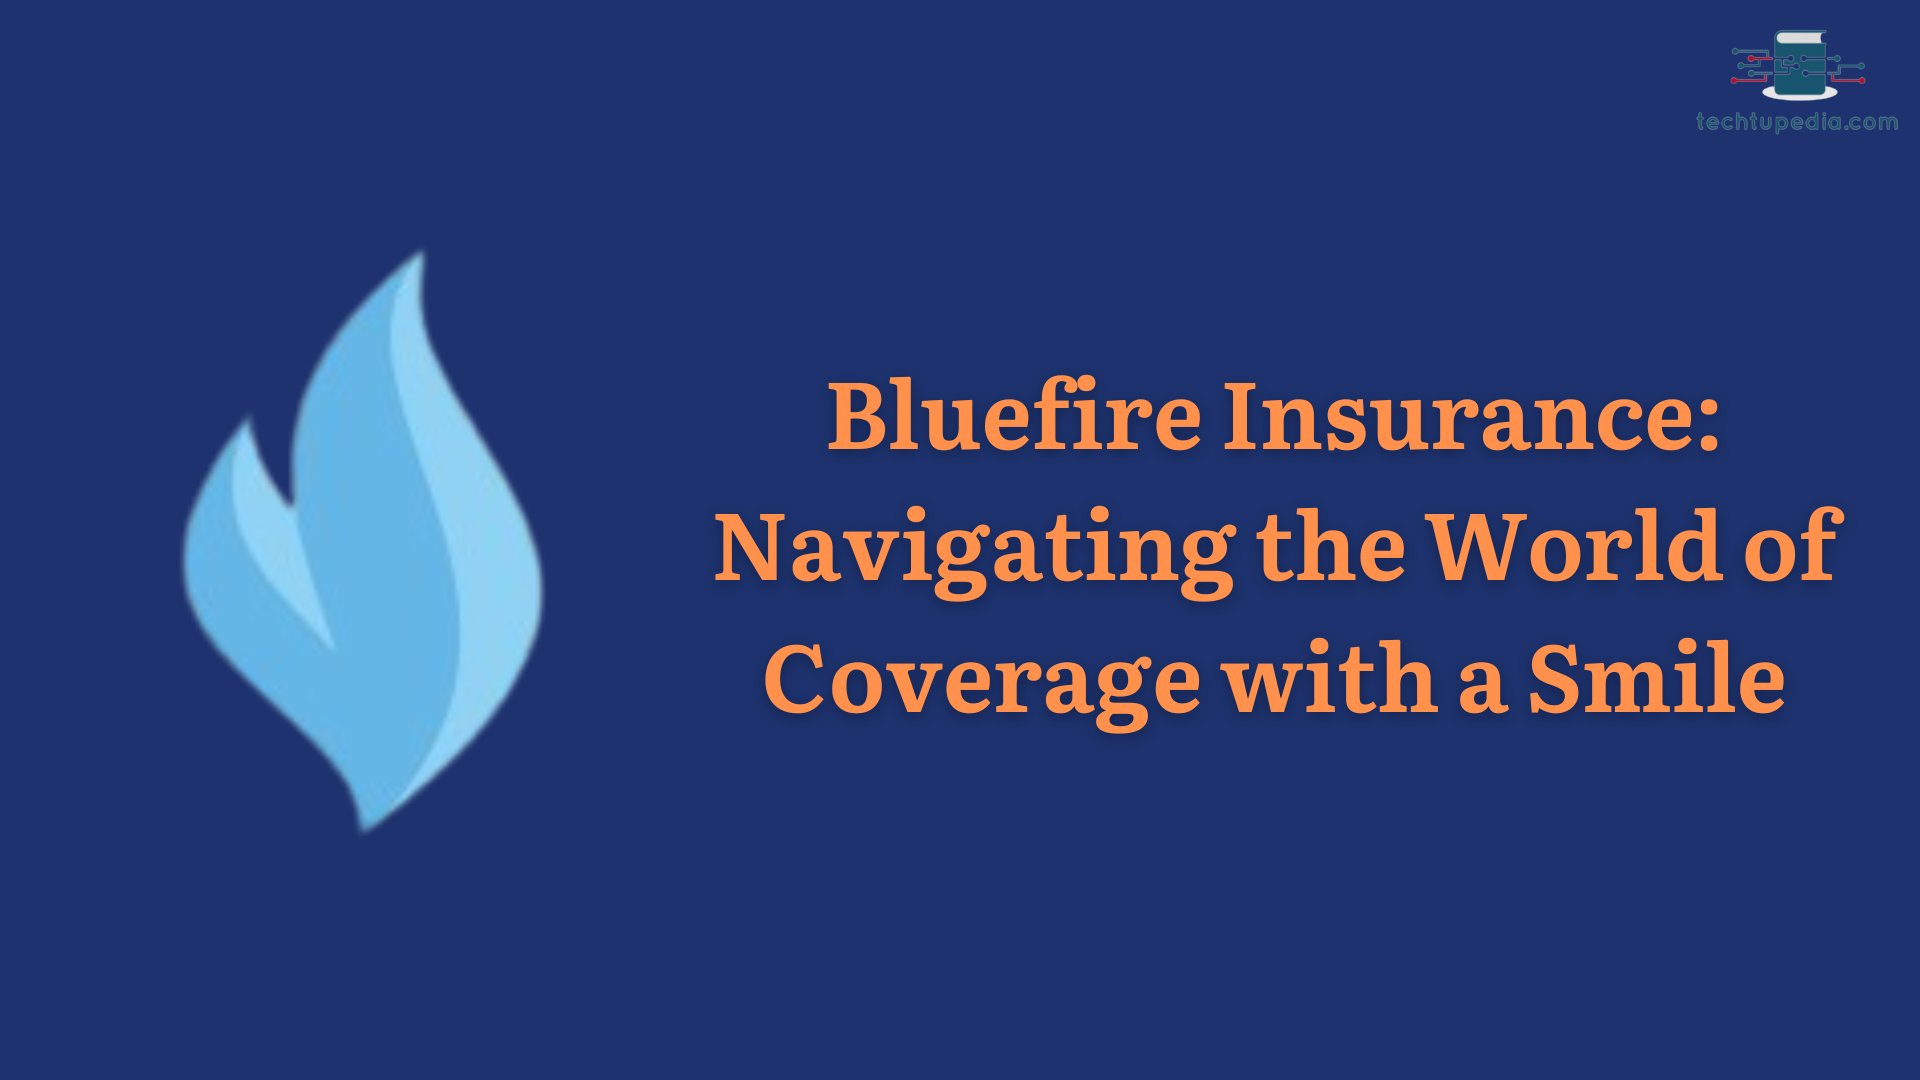 Bluefire Insurance: Navigating the World of Coverage with a Smile